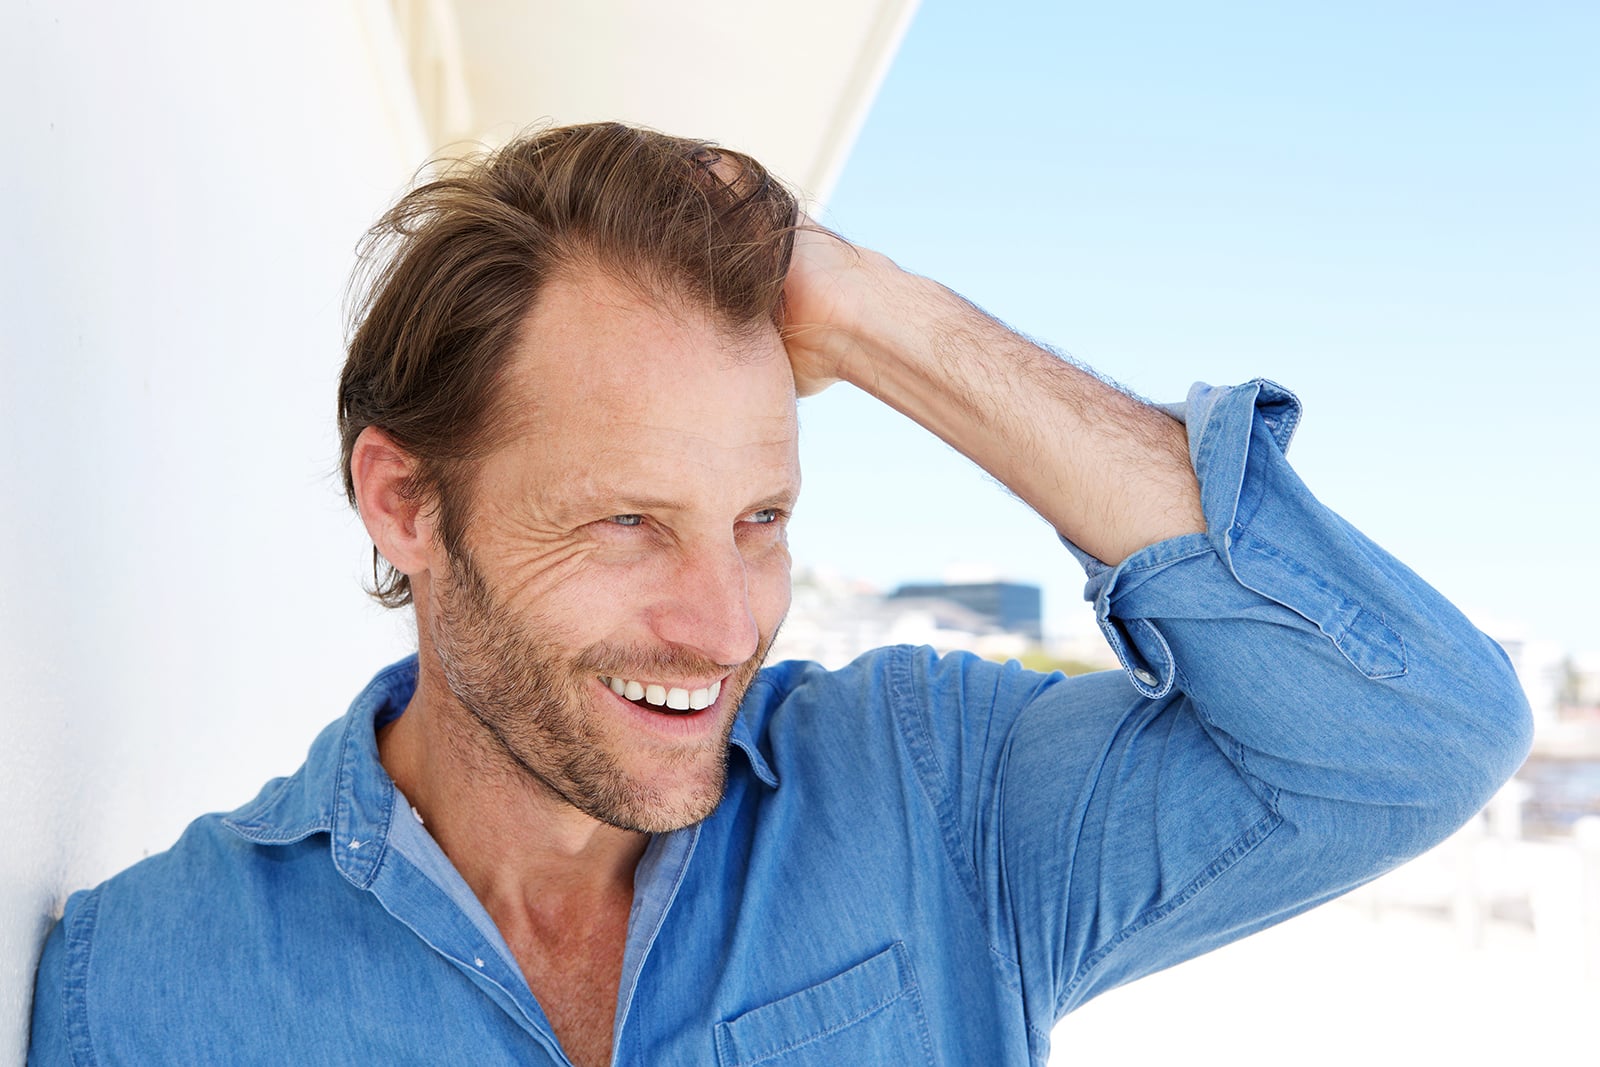 Hair style for a man with thinning hair